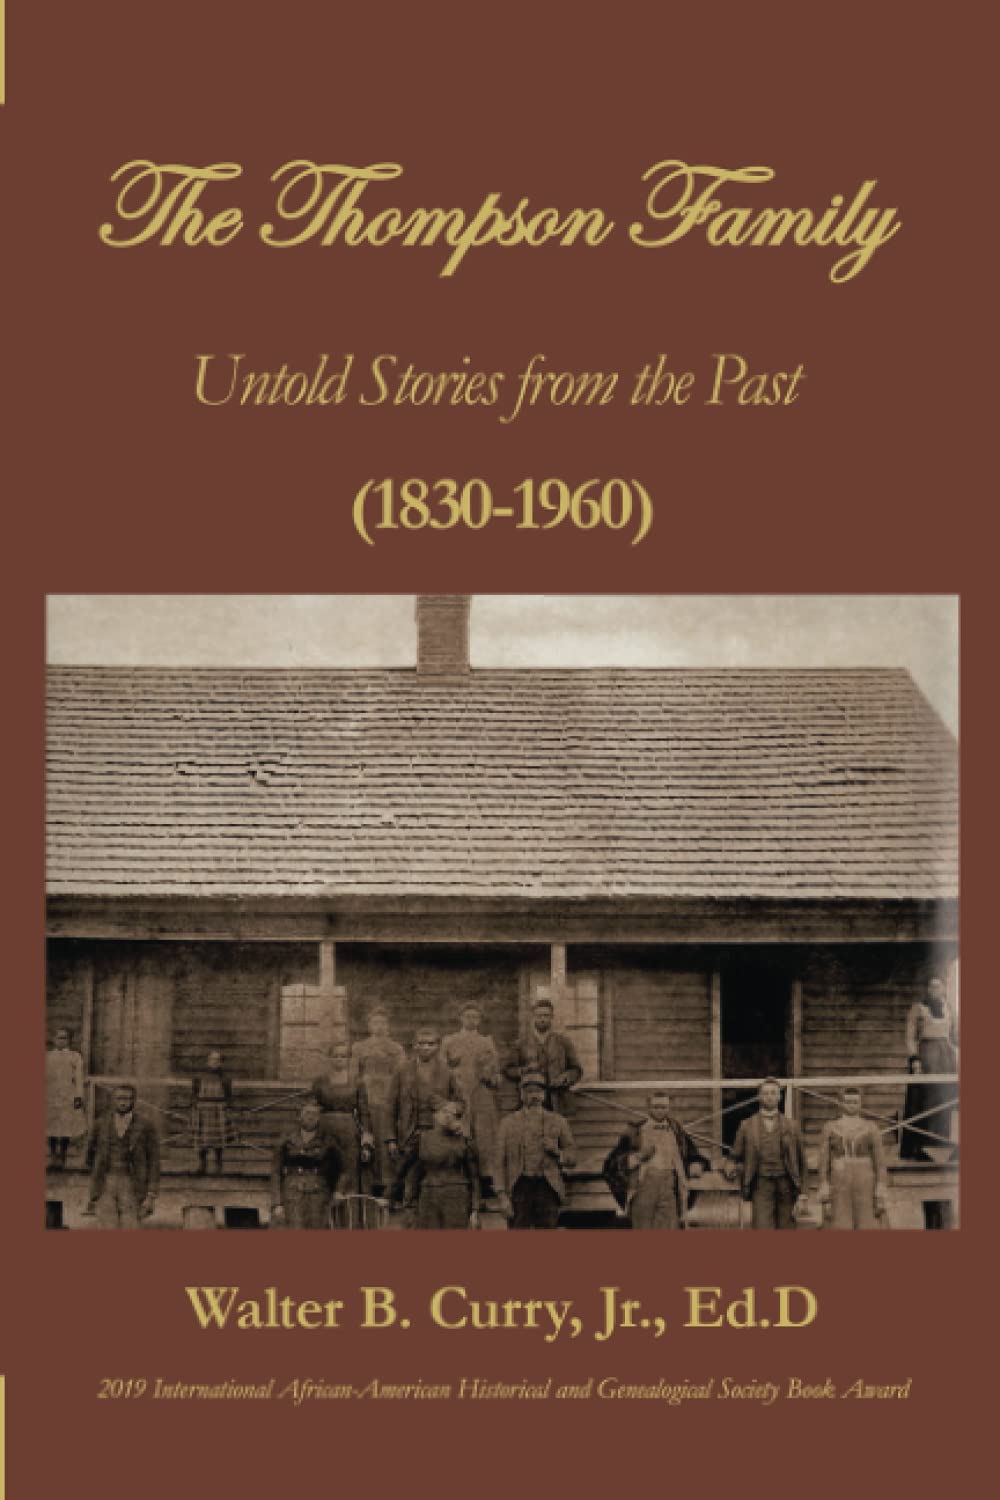 The Thompson Family: Untold Stories from the Past (1830-1960)